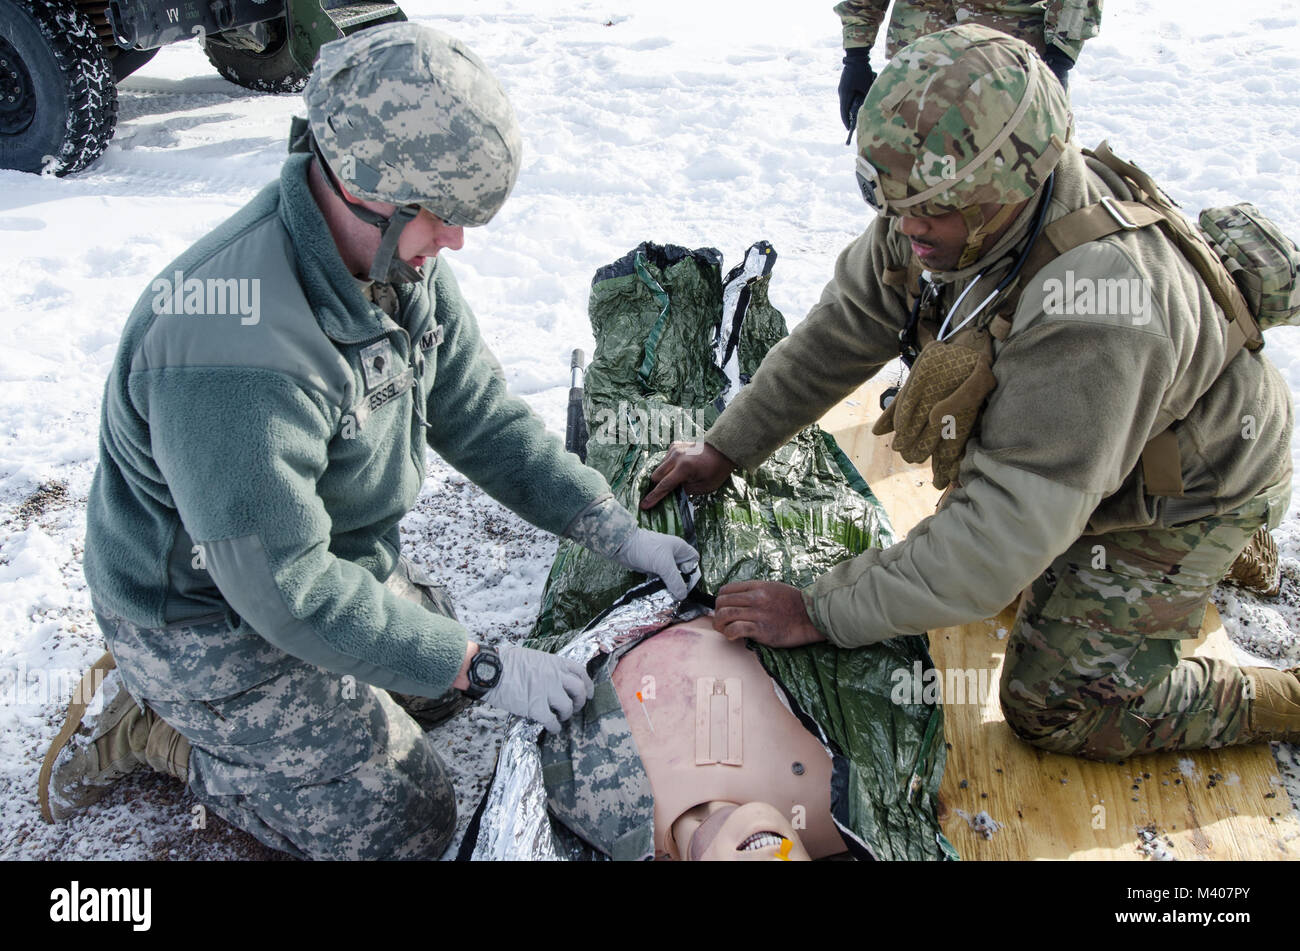 FORT MCCOY, Wis. - U.S. Army Reserve Staff Sgt. Javar Manley (right) and Spc. Jonathan Hessel, medics, Task Force Triad, Operation Cold Steel II, cover an emergency patient simulator with an emergency blanket during a medical evacuation rehearsal at Fort McCoy, Wis., Feb. 8, 2018. Operation Cold Steel is the U.S. Army Reserve’s crew-served weapons qualification and validation exercise to ensure America’s Army Reserve units and Soldiers are trained and ready to deploy on short-notice as part of Ready Force X and bring combat-ready and lethal firepower in support of the Army and our joint partne Stock Photo